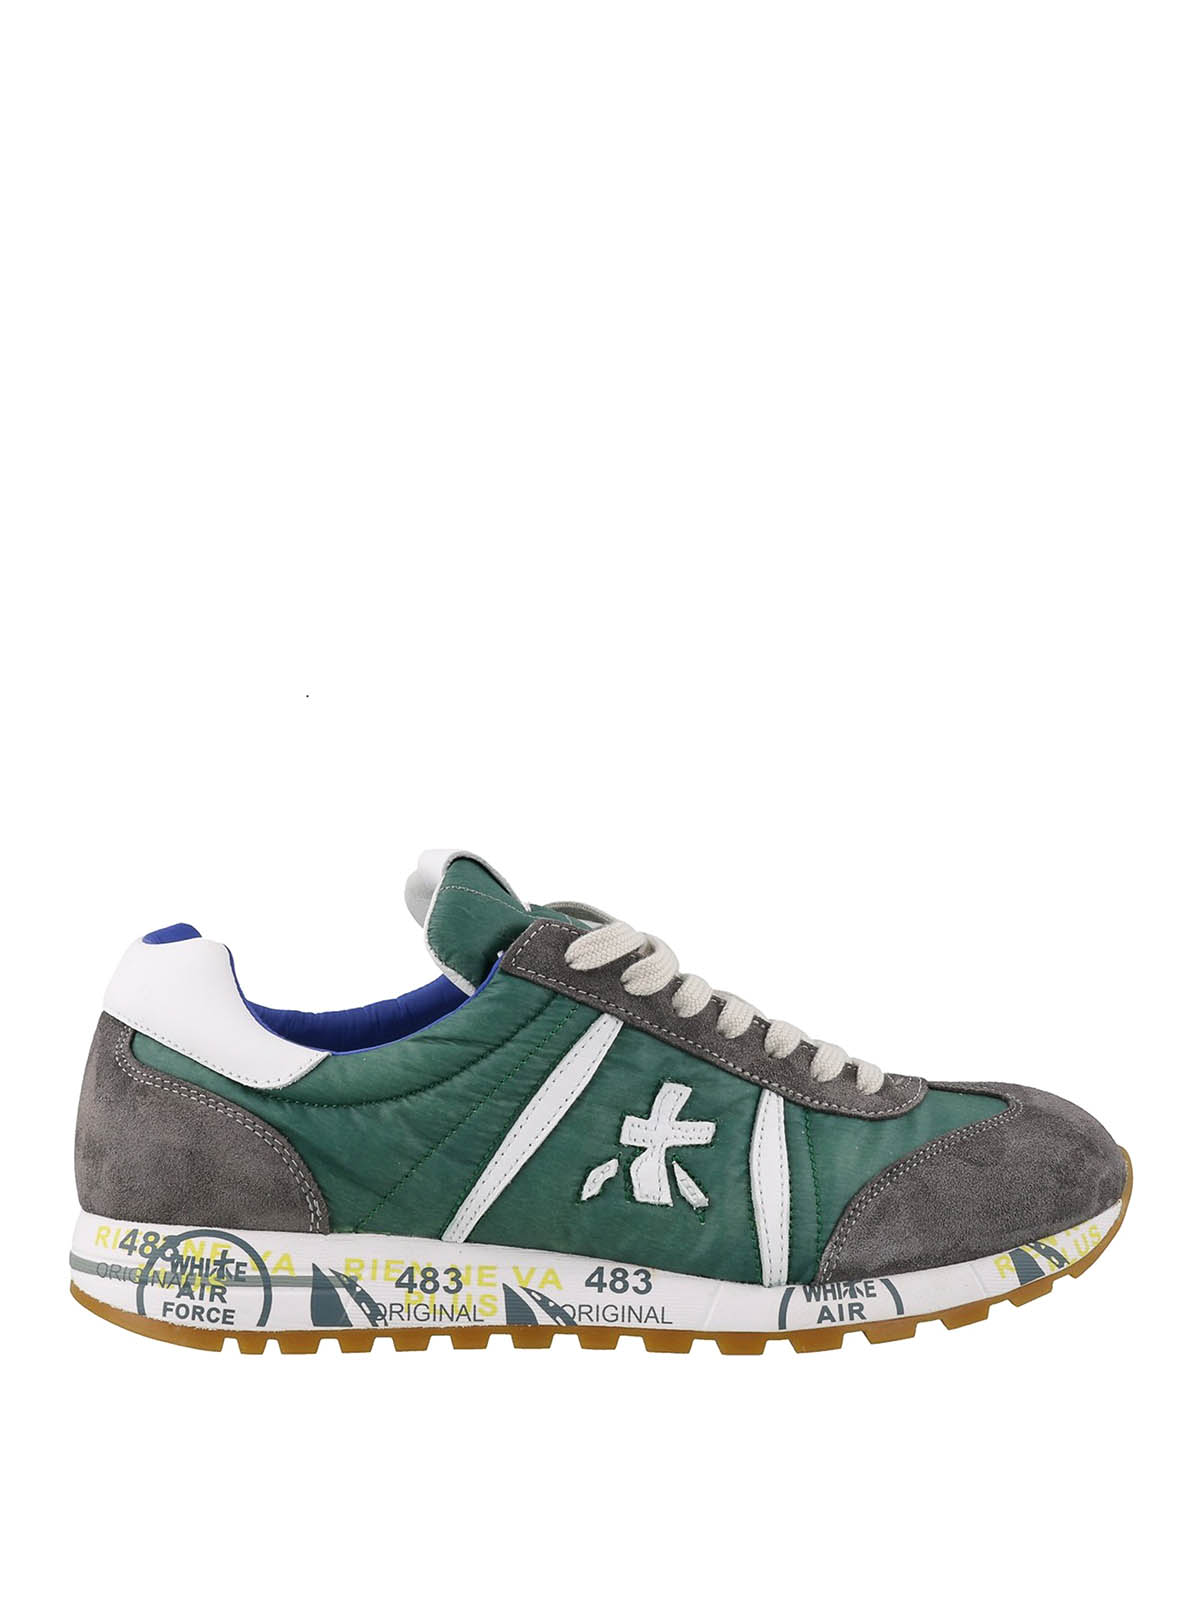 Trainers Premiata - Lucy 4574 sneakers - LUCY4574 | Shop online at iKRIX